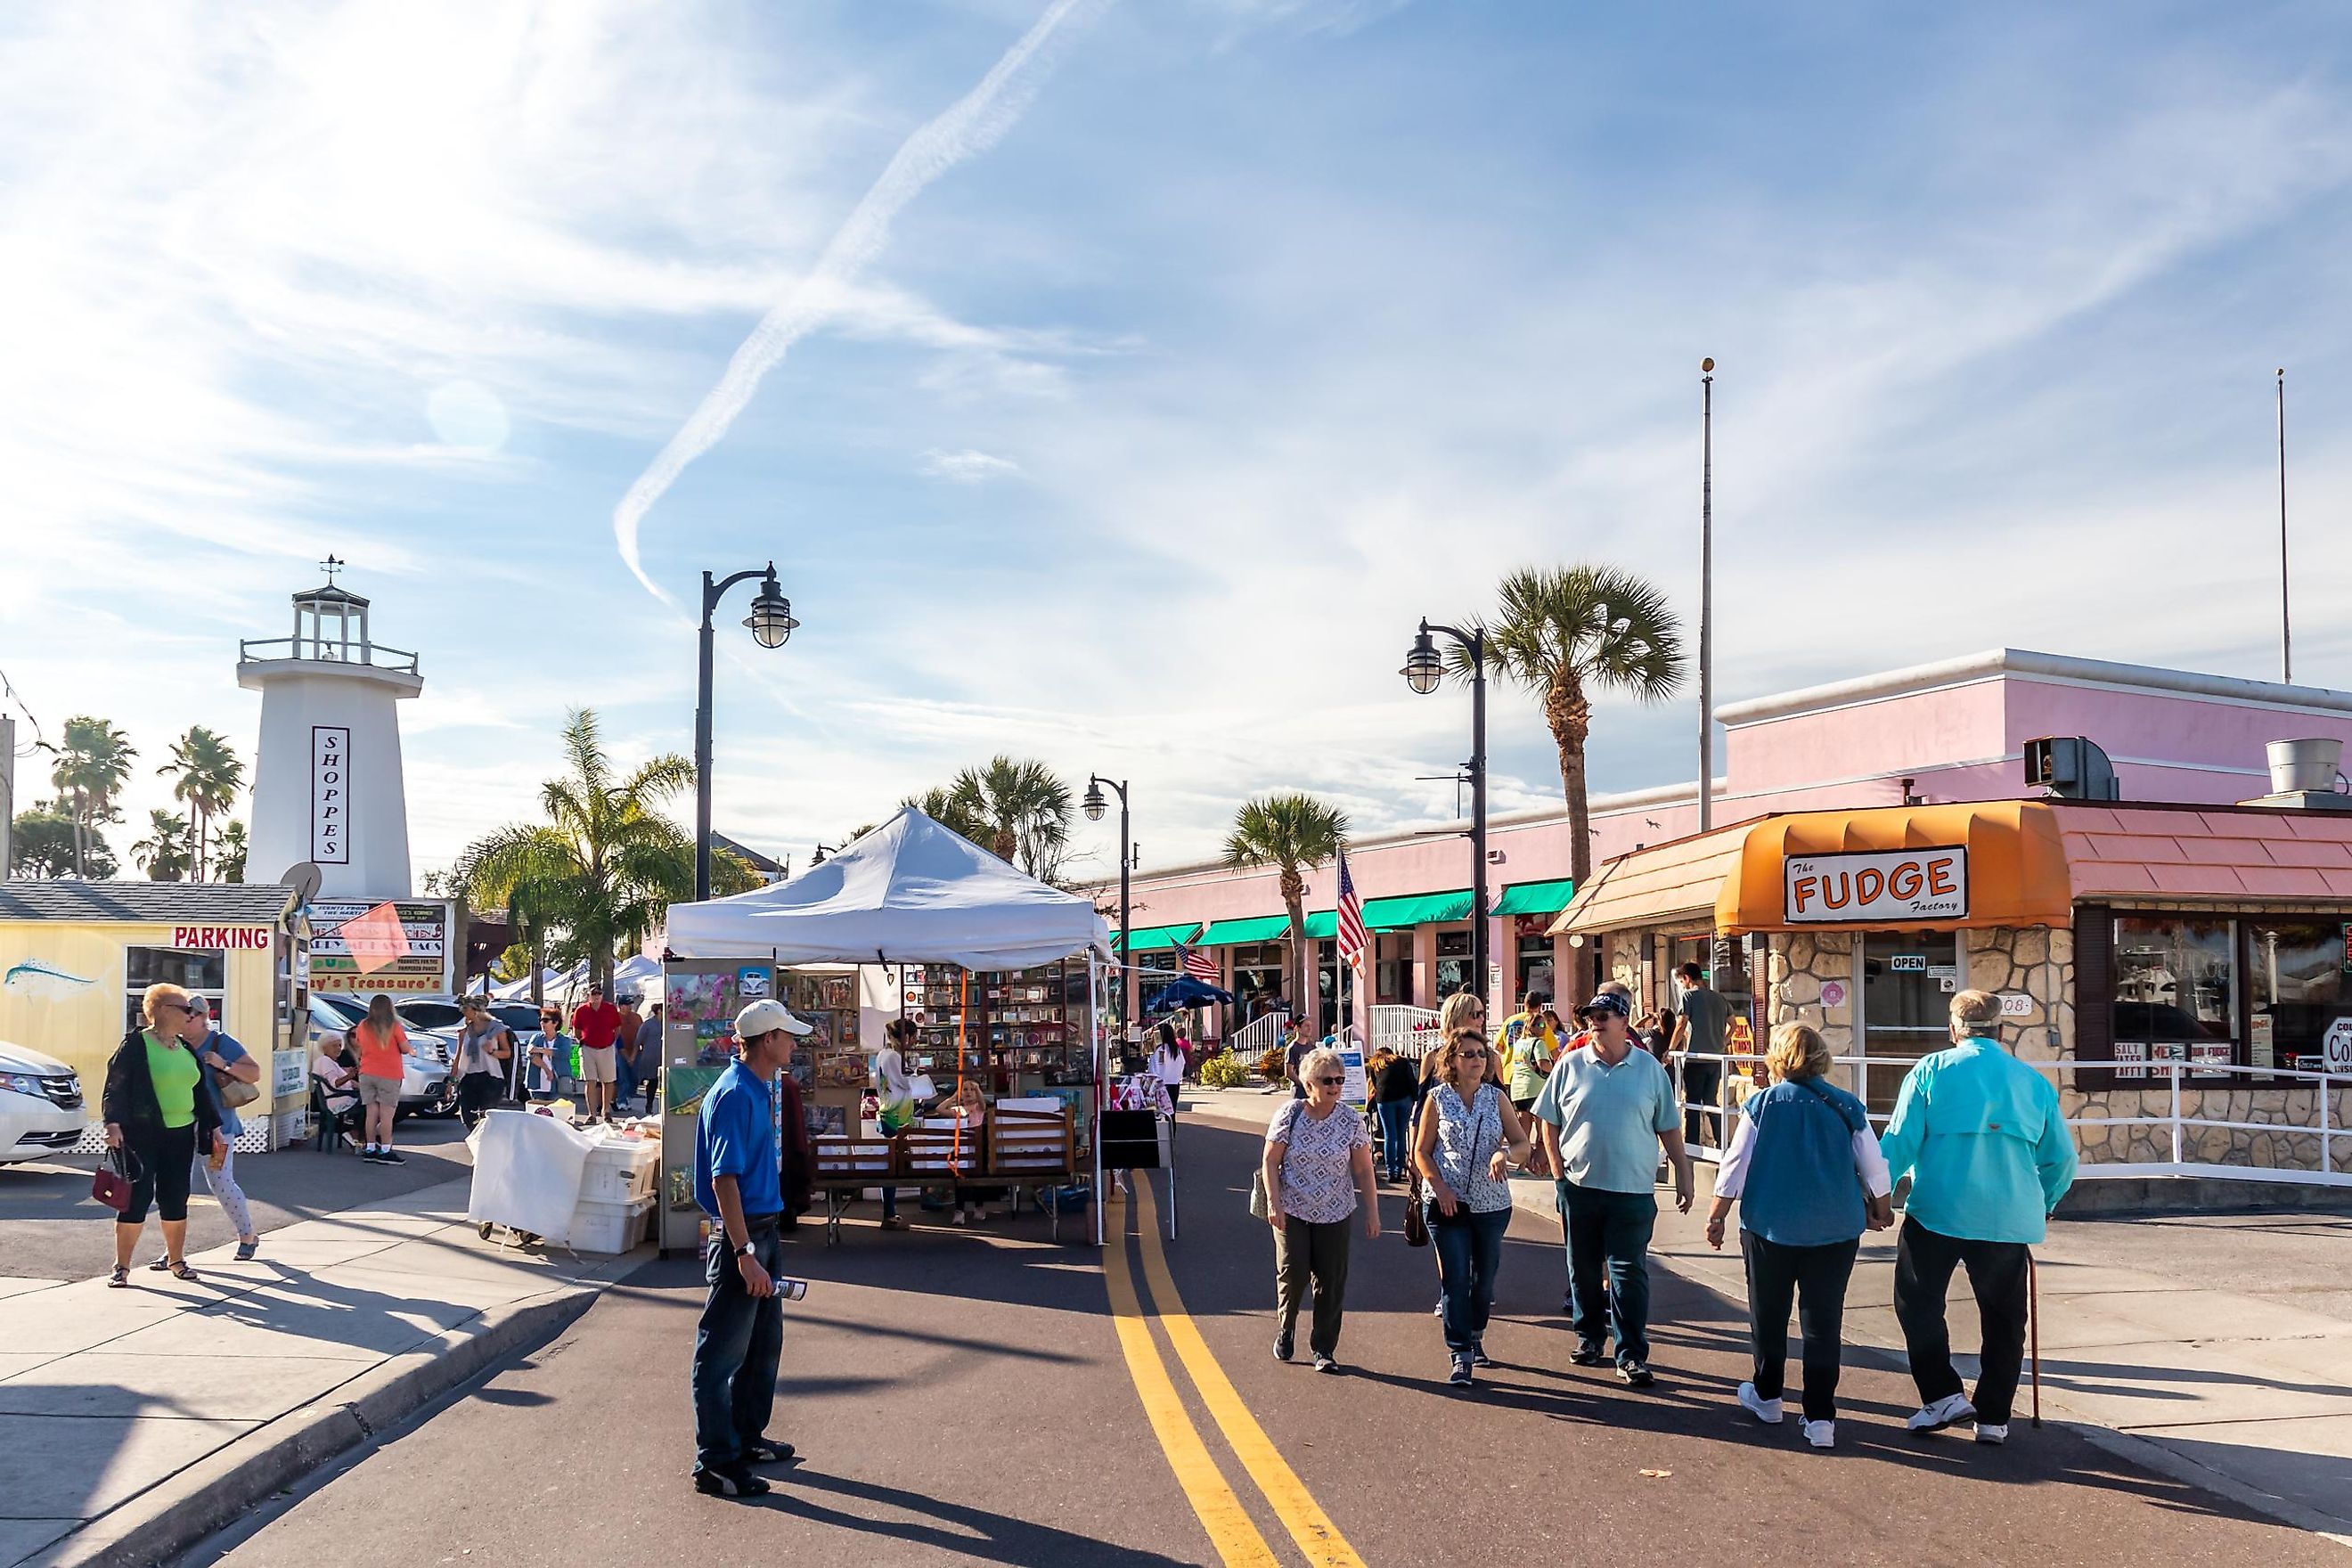 People walking around in the historical downtown of Tarpon Springs, Florida. Image credit Microfile.org via Shutterstock.com